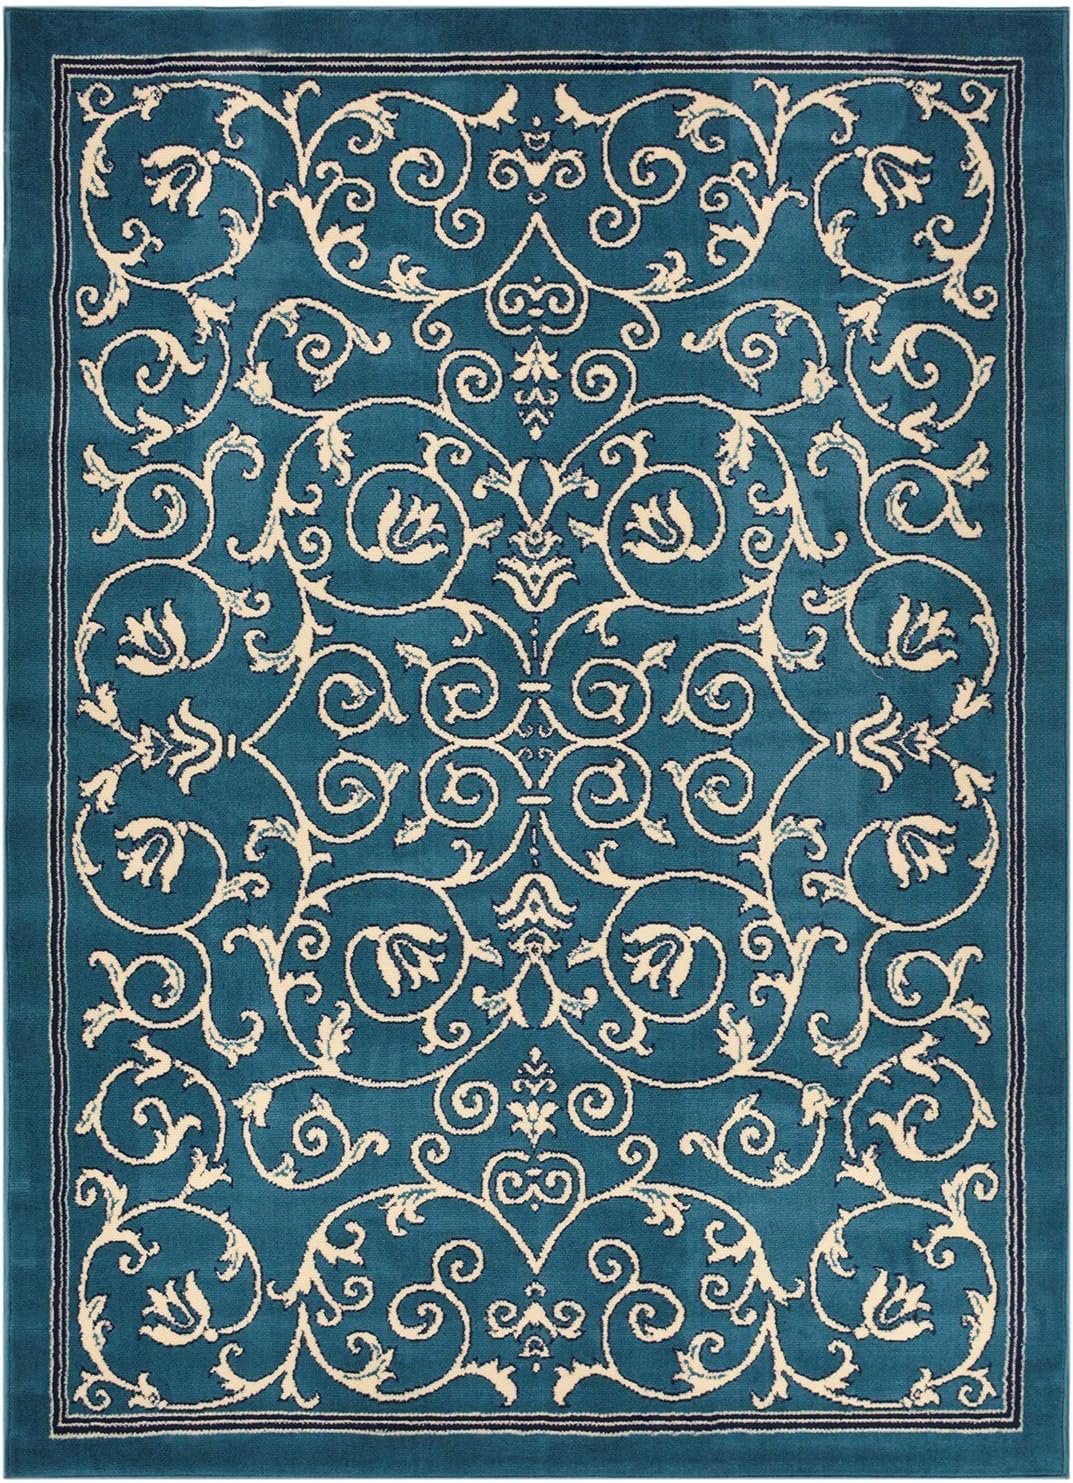 Conur Collection Floral Scroll Area Rug Rugs Modern Contemporary Traditional Area Rug (Petrol Blue, 4'11" x 6'11")